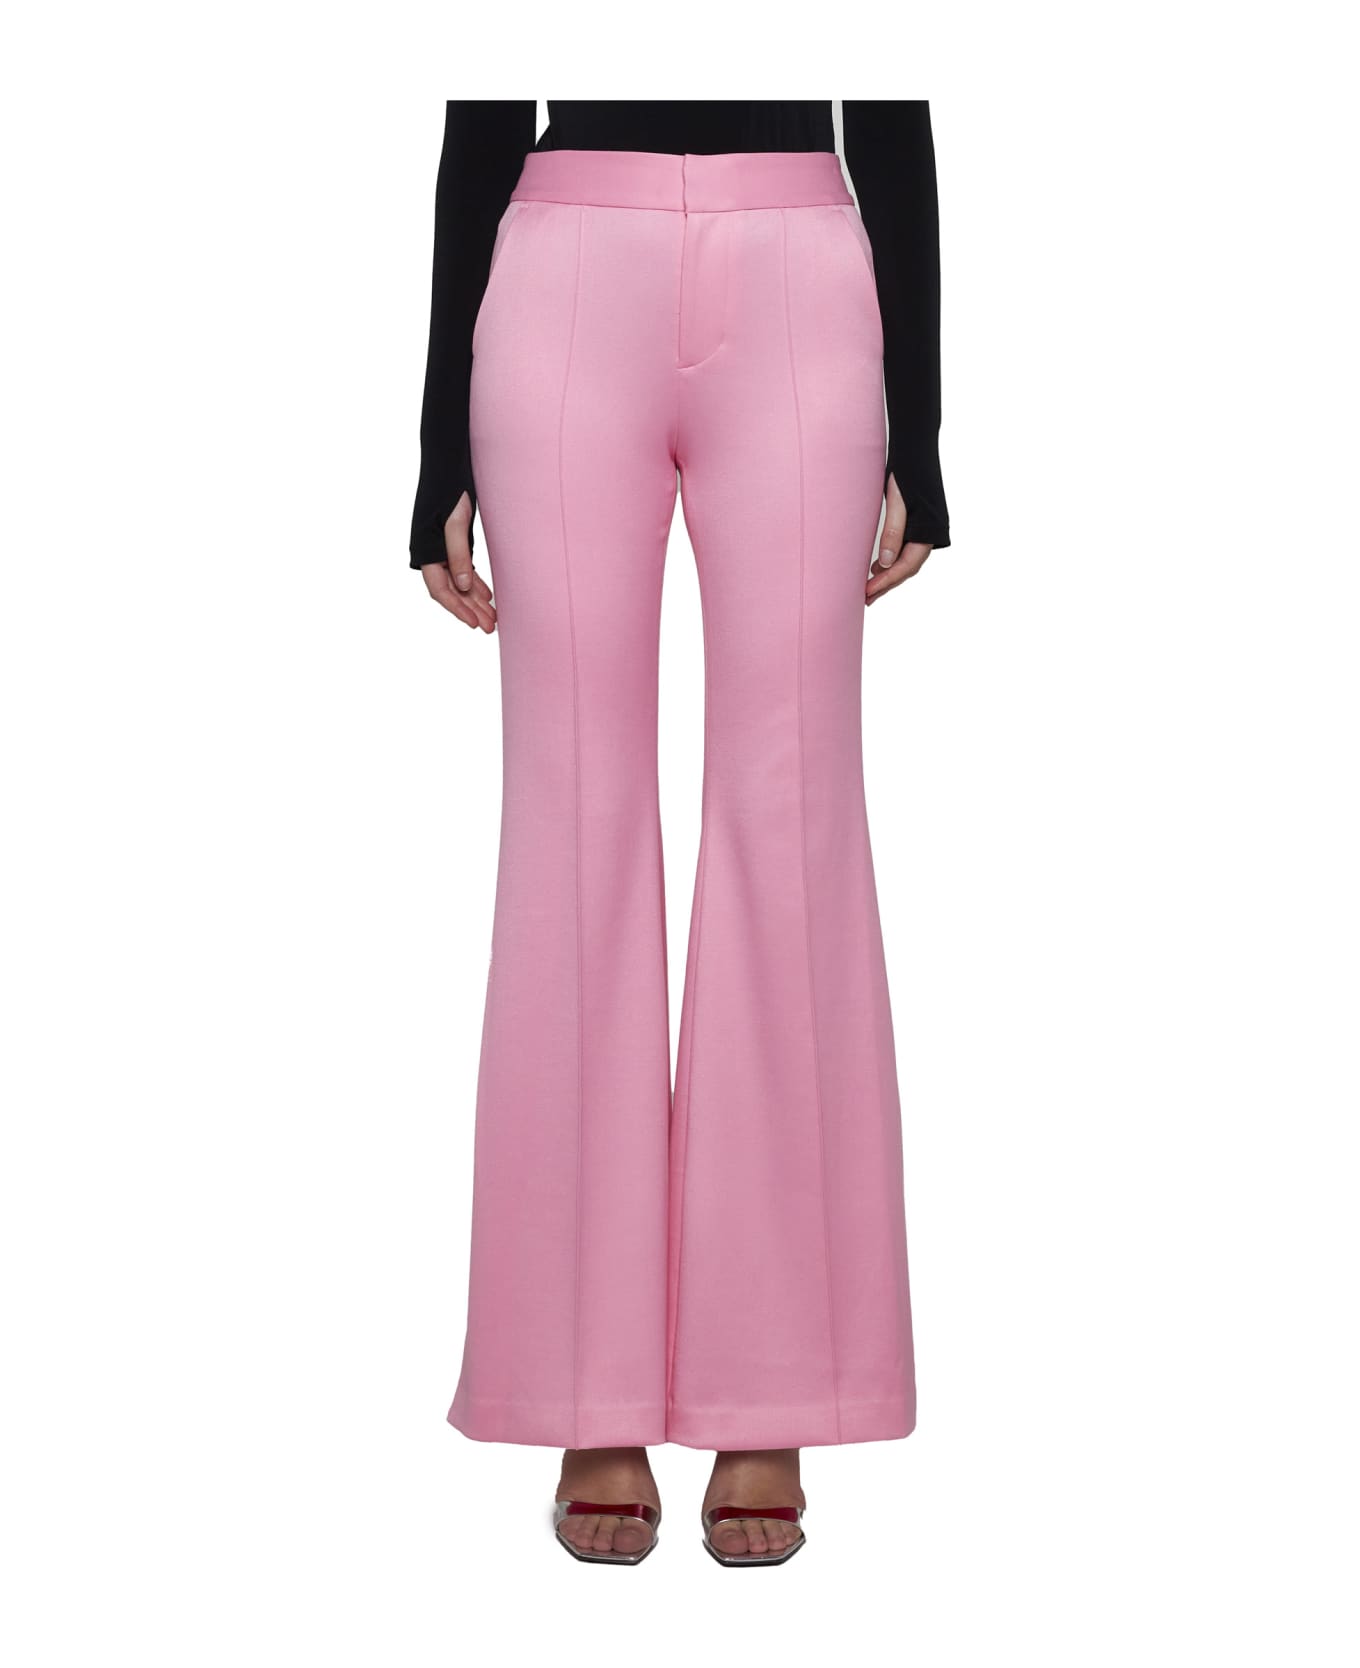 ABOUT YOU Pullover 'Joaline' nero Pants - Cherry blossom